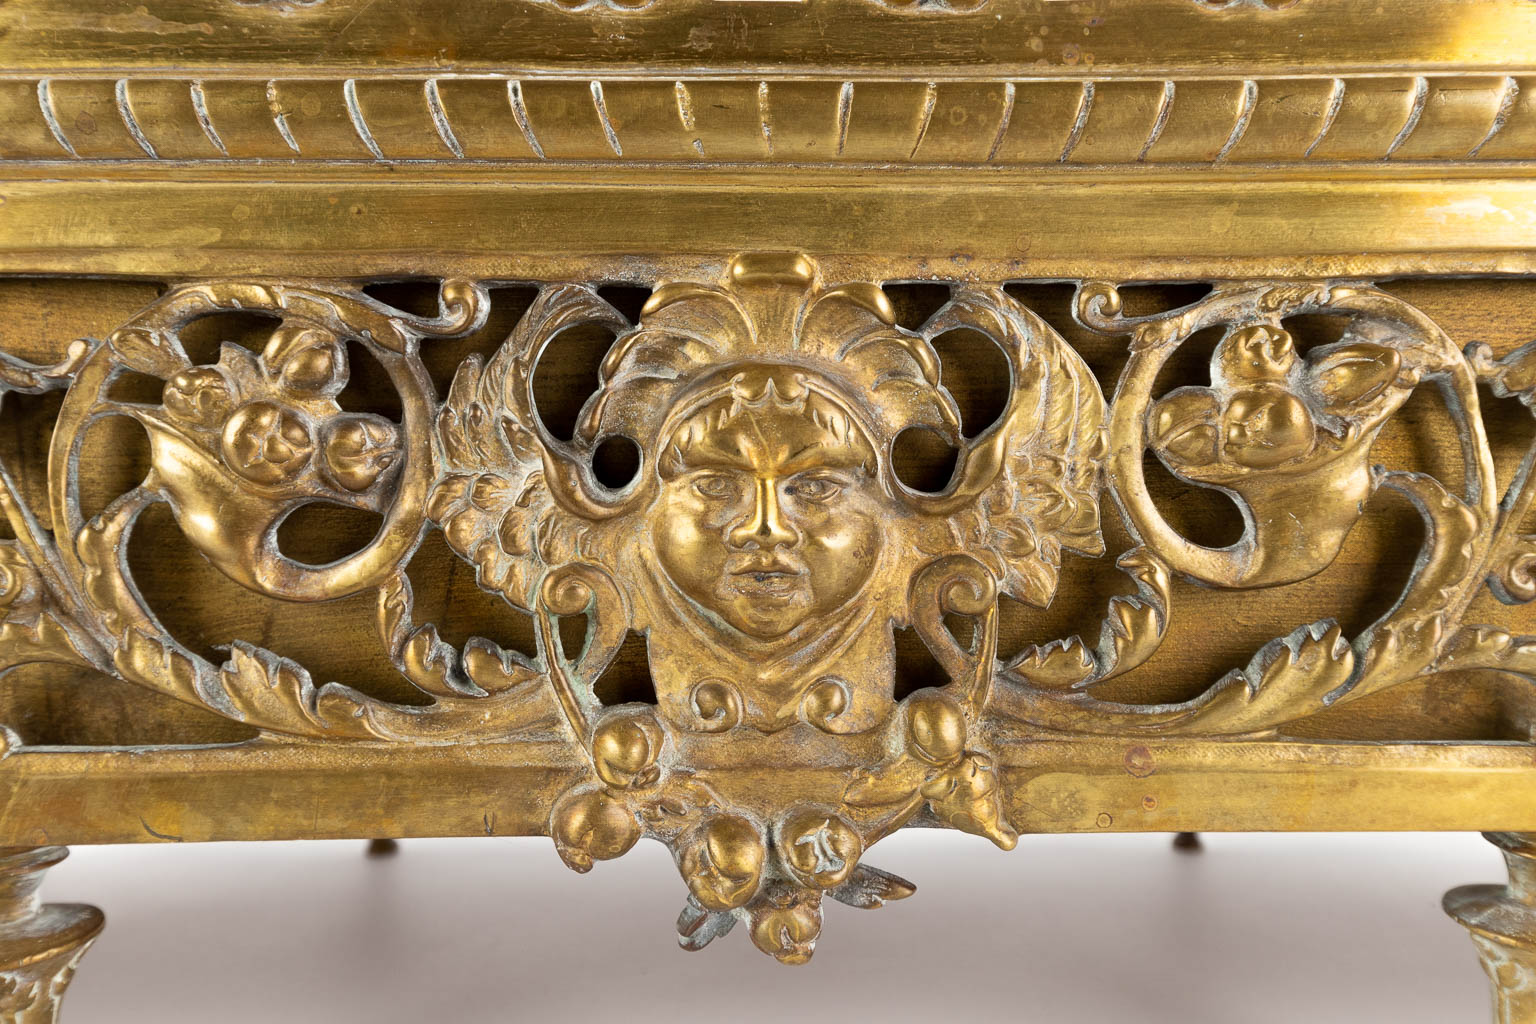 A large bronze Jardinière, decorated with lions and garlands. Circa 1900. (D:21 x W:70 x H:18 cm)